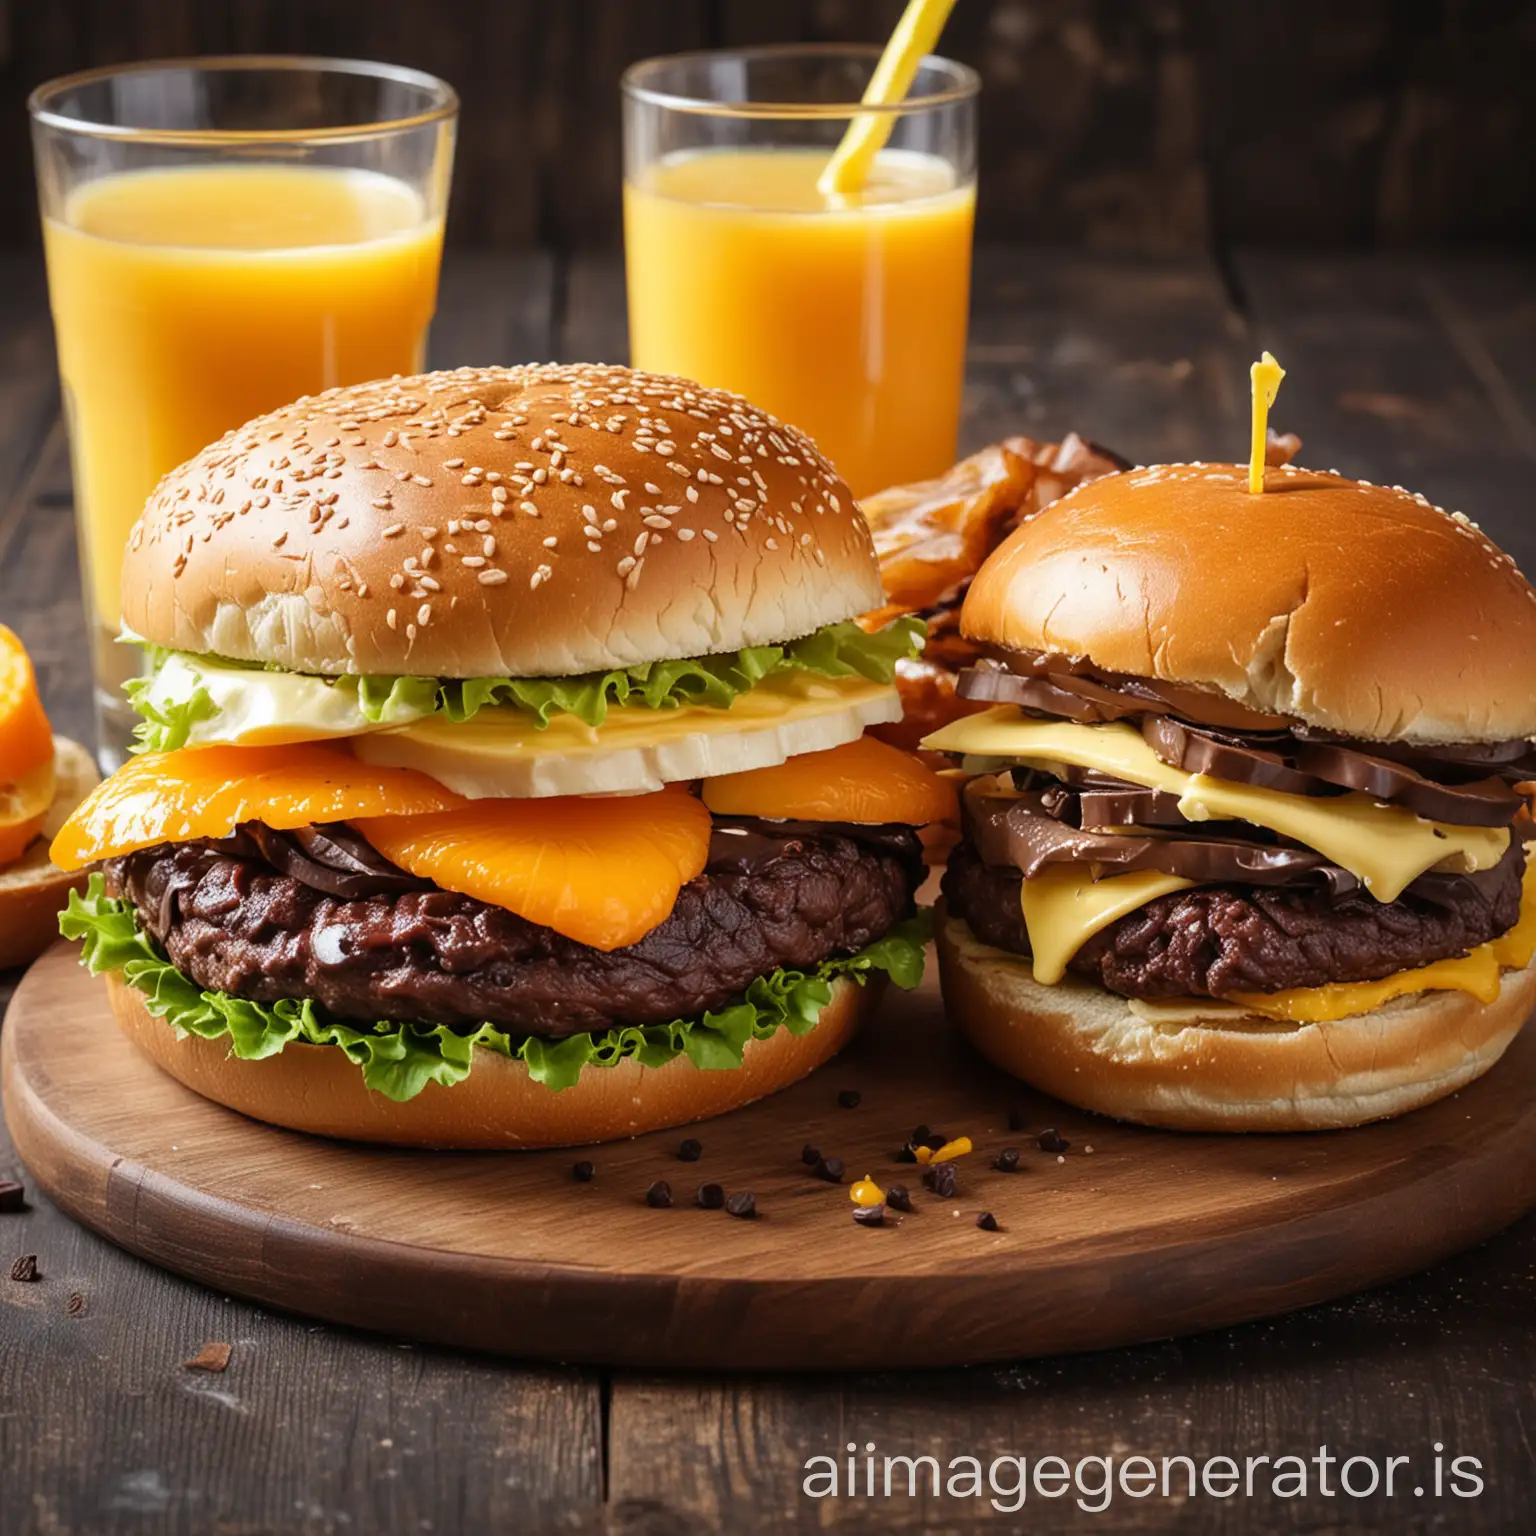 delicious sandwich and hamburger, with chocolate and butter, orange juice